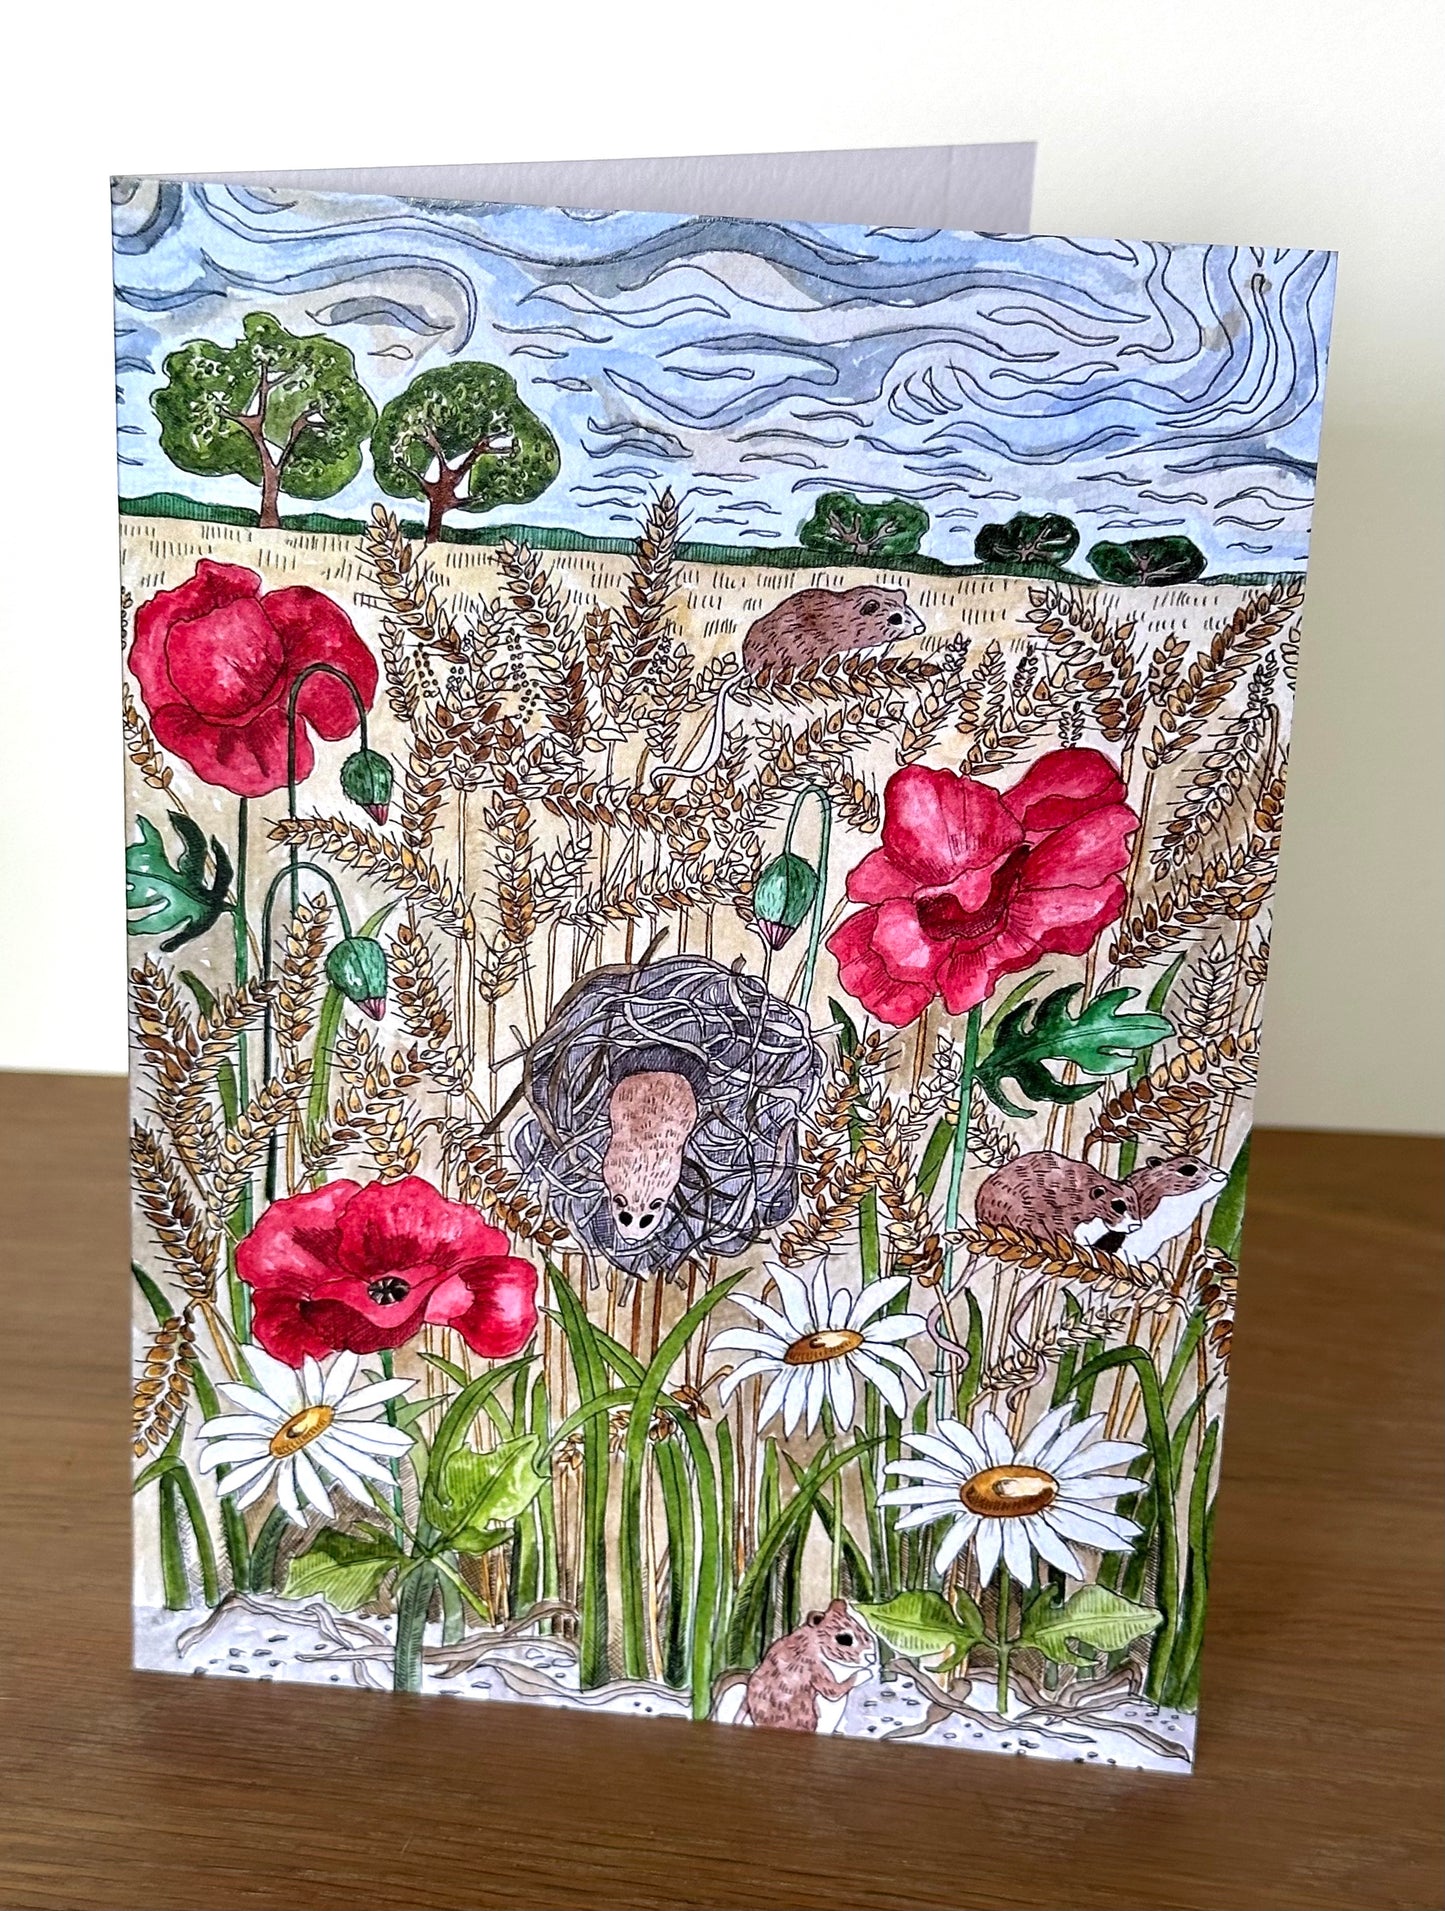 Greeting Cards - contemporary countryside scene